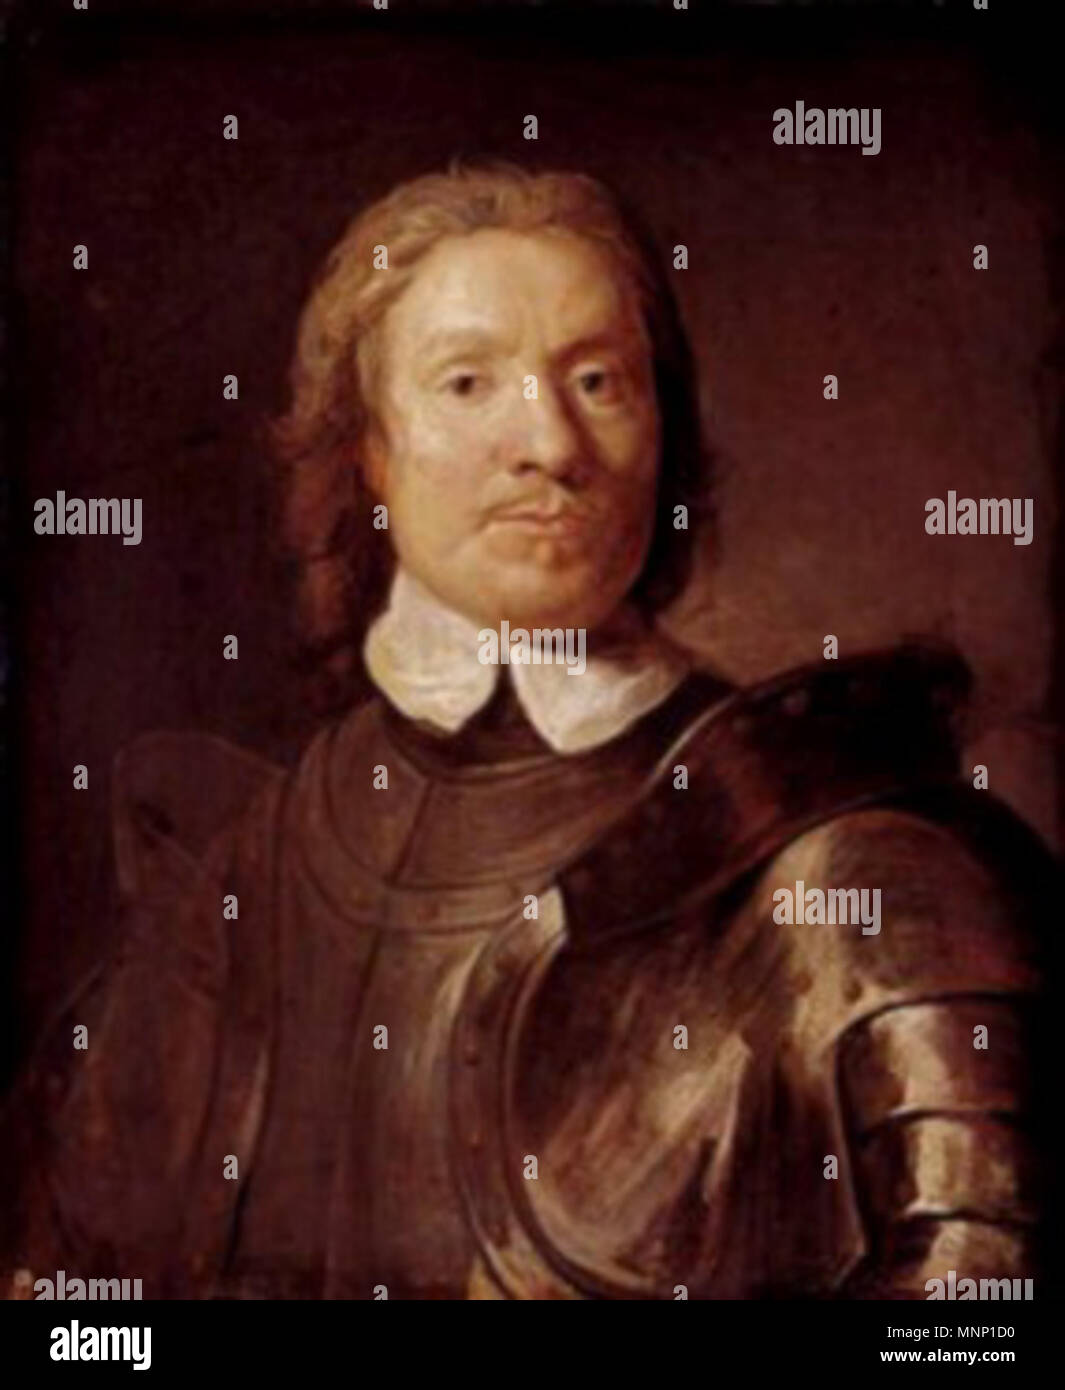 . Portrait of Oliver Cromwell, Lord Protector of the Commonwealth of Britain . 17th century.    Caspar de Crayer  (1584–1669)     Alternative names Caspar de Crayer, Gaspard de Crayer, Jasper de Crayer  Description Flemish painter, draughtsman, printmaker and court painter  Date of birth/death 18 November 1584 27 January 1669  Location of birth/death Antwerp Ghent  Work location Brussels, Ghent (1664-1669)  Authority control  : Q570172 VIAF: 76588643 ISNI: 0000 0000 6631 7095 ULAN: 500019948 LCCN: no98034253 WGA: CRAYER, Gaspard de WorldCat 941 Oliver Cromwell Gaspard de Crayer Stock Photo